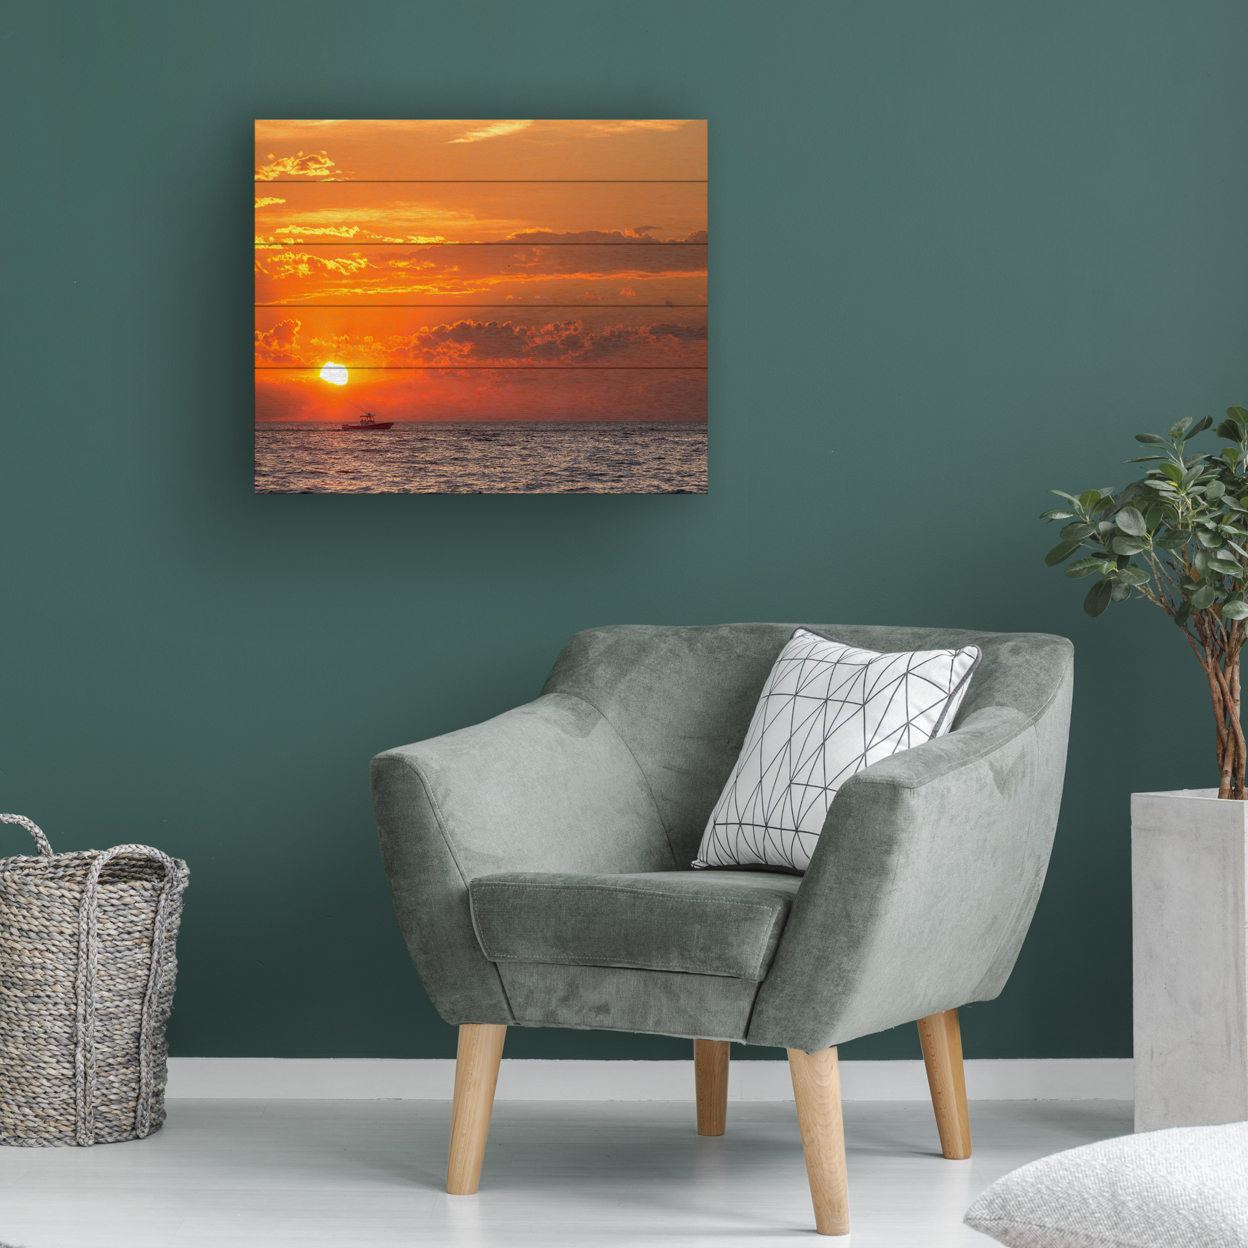 Wooden Slat Art 18 X 22 Inches Titled Fishing Boat Sunset Ready To Hang Home Decor Picture